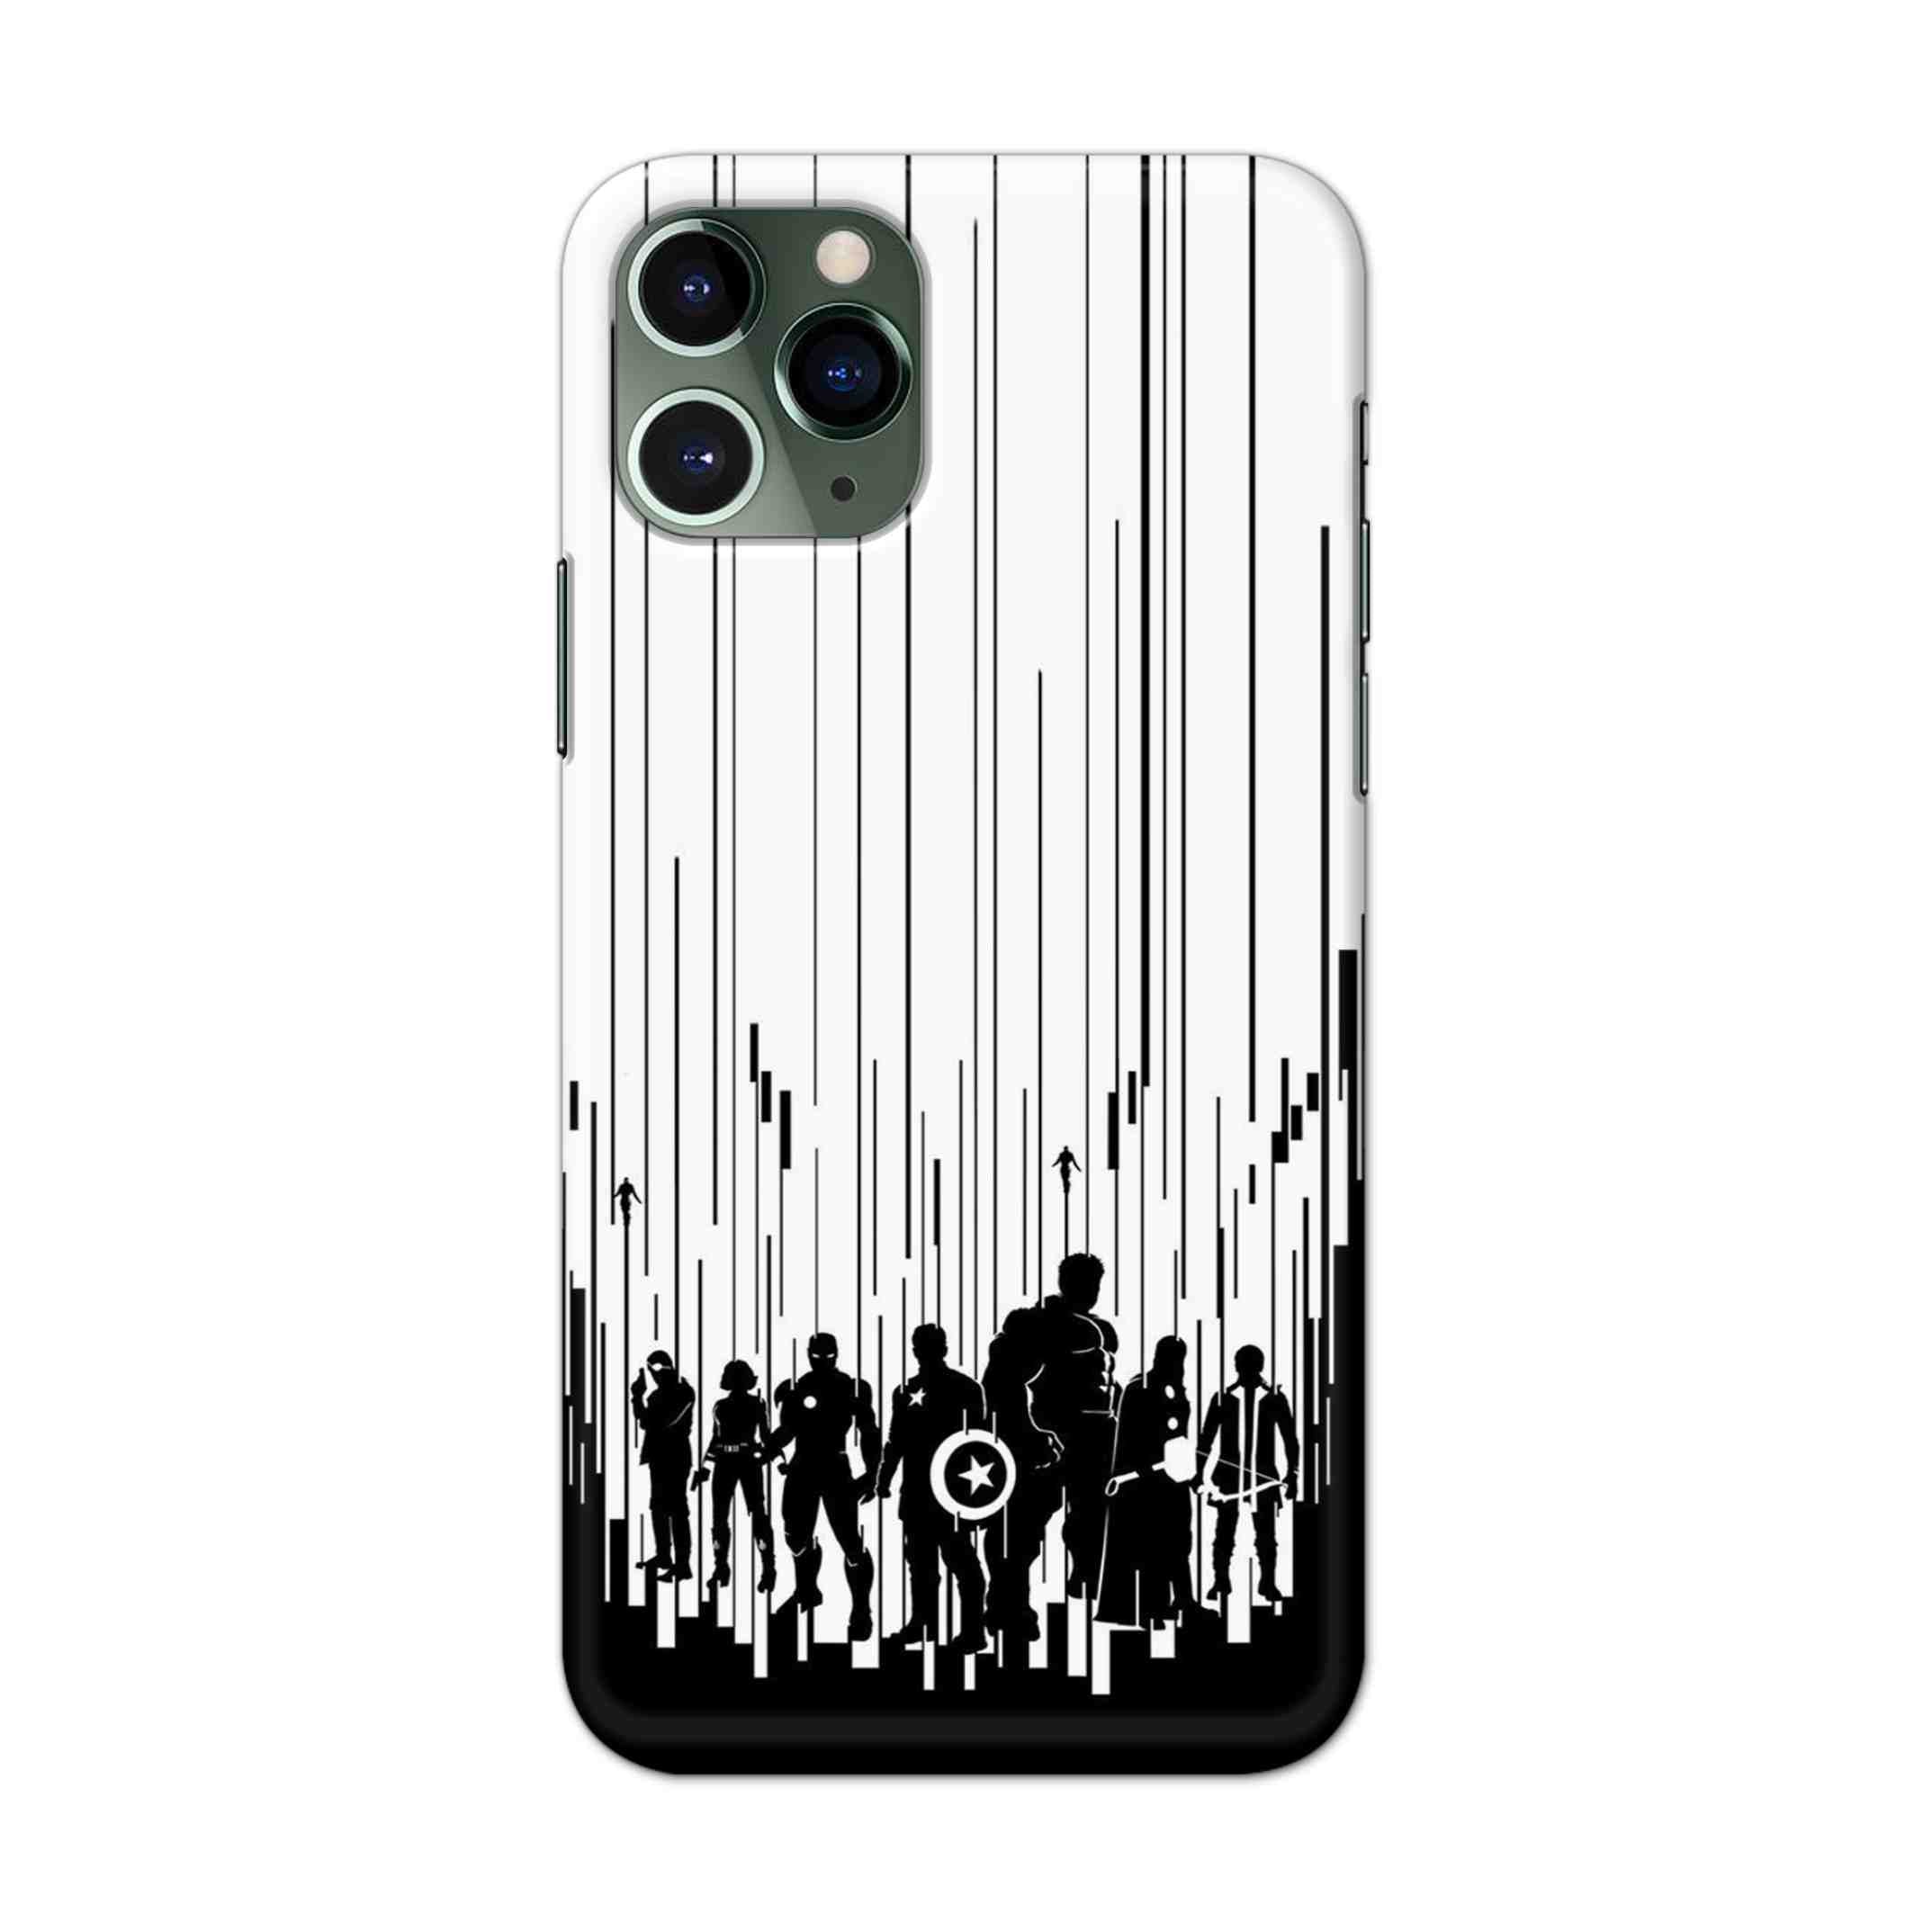 Buy Black And White Avanegers Hard Back Mobile Phone Case/Cover For iPhone 11 Pro Max Online